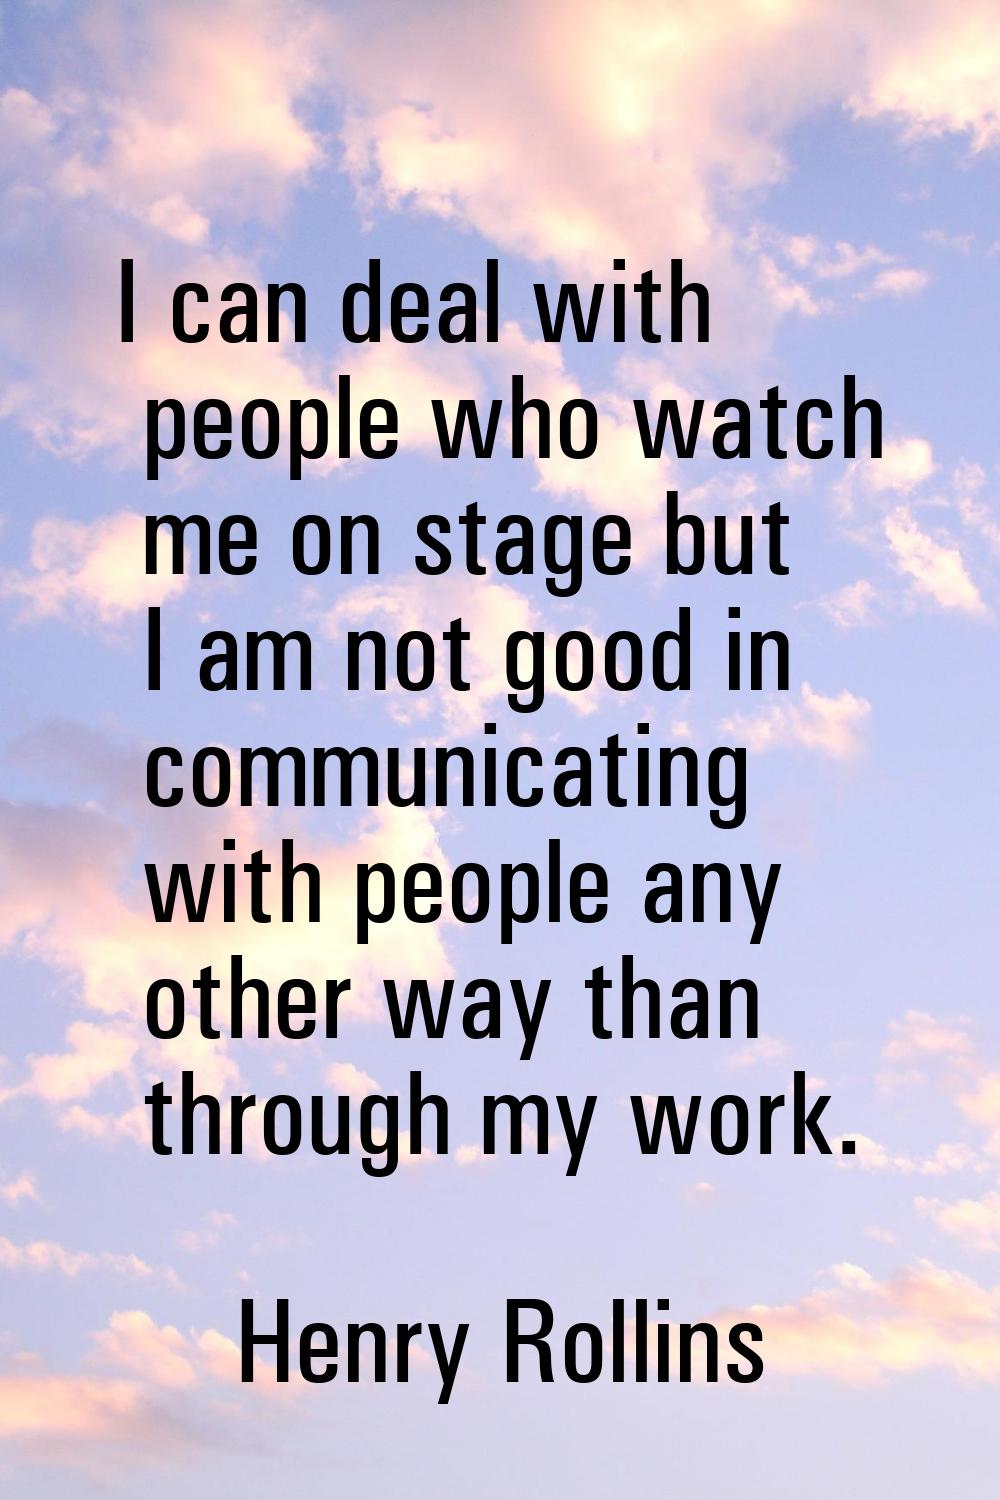 I can deal with people who watch me on stage but I am not good in communicating with people any oth